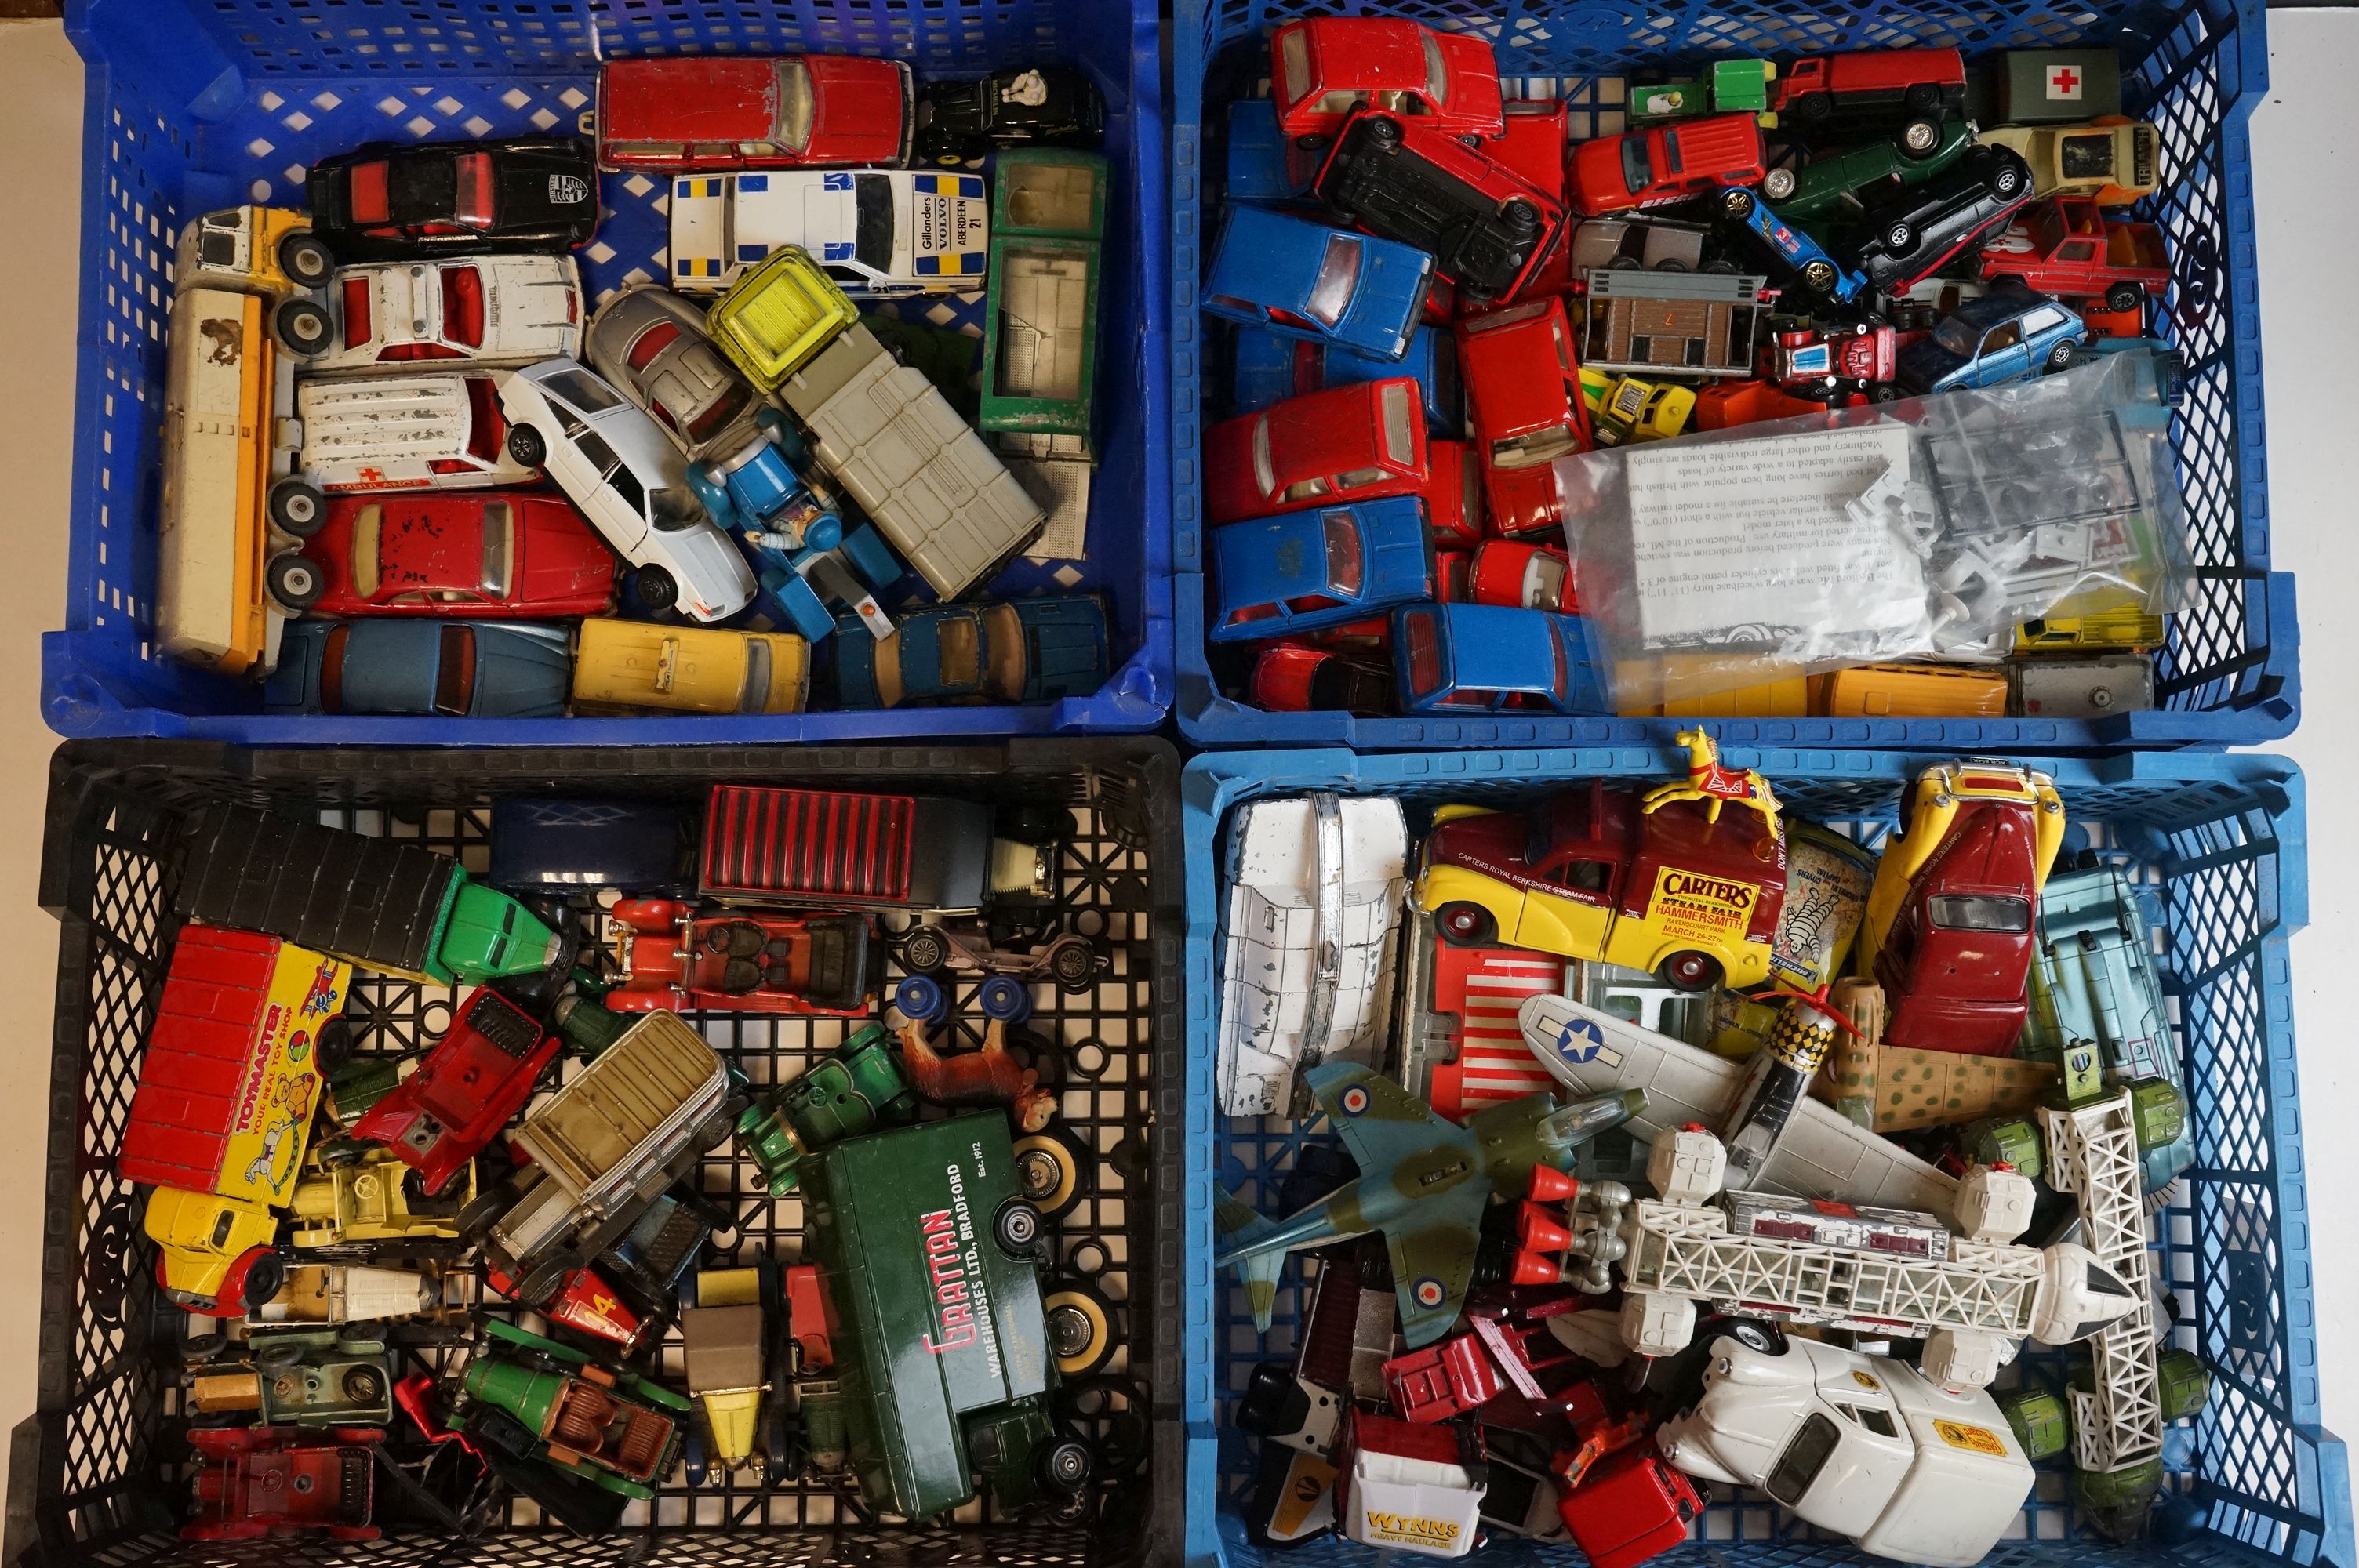 A large collection of vintage play worn die cast vehicles to include Corgi and Dinky examples.